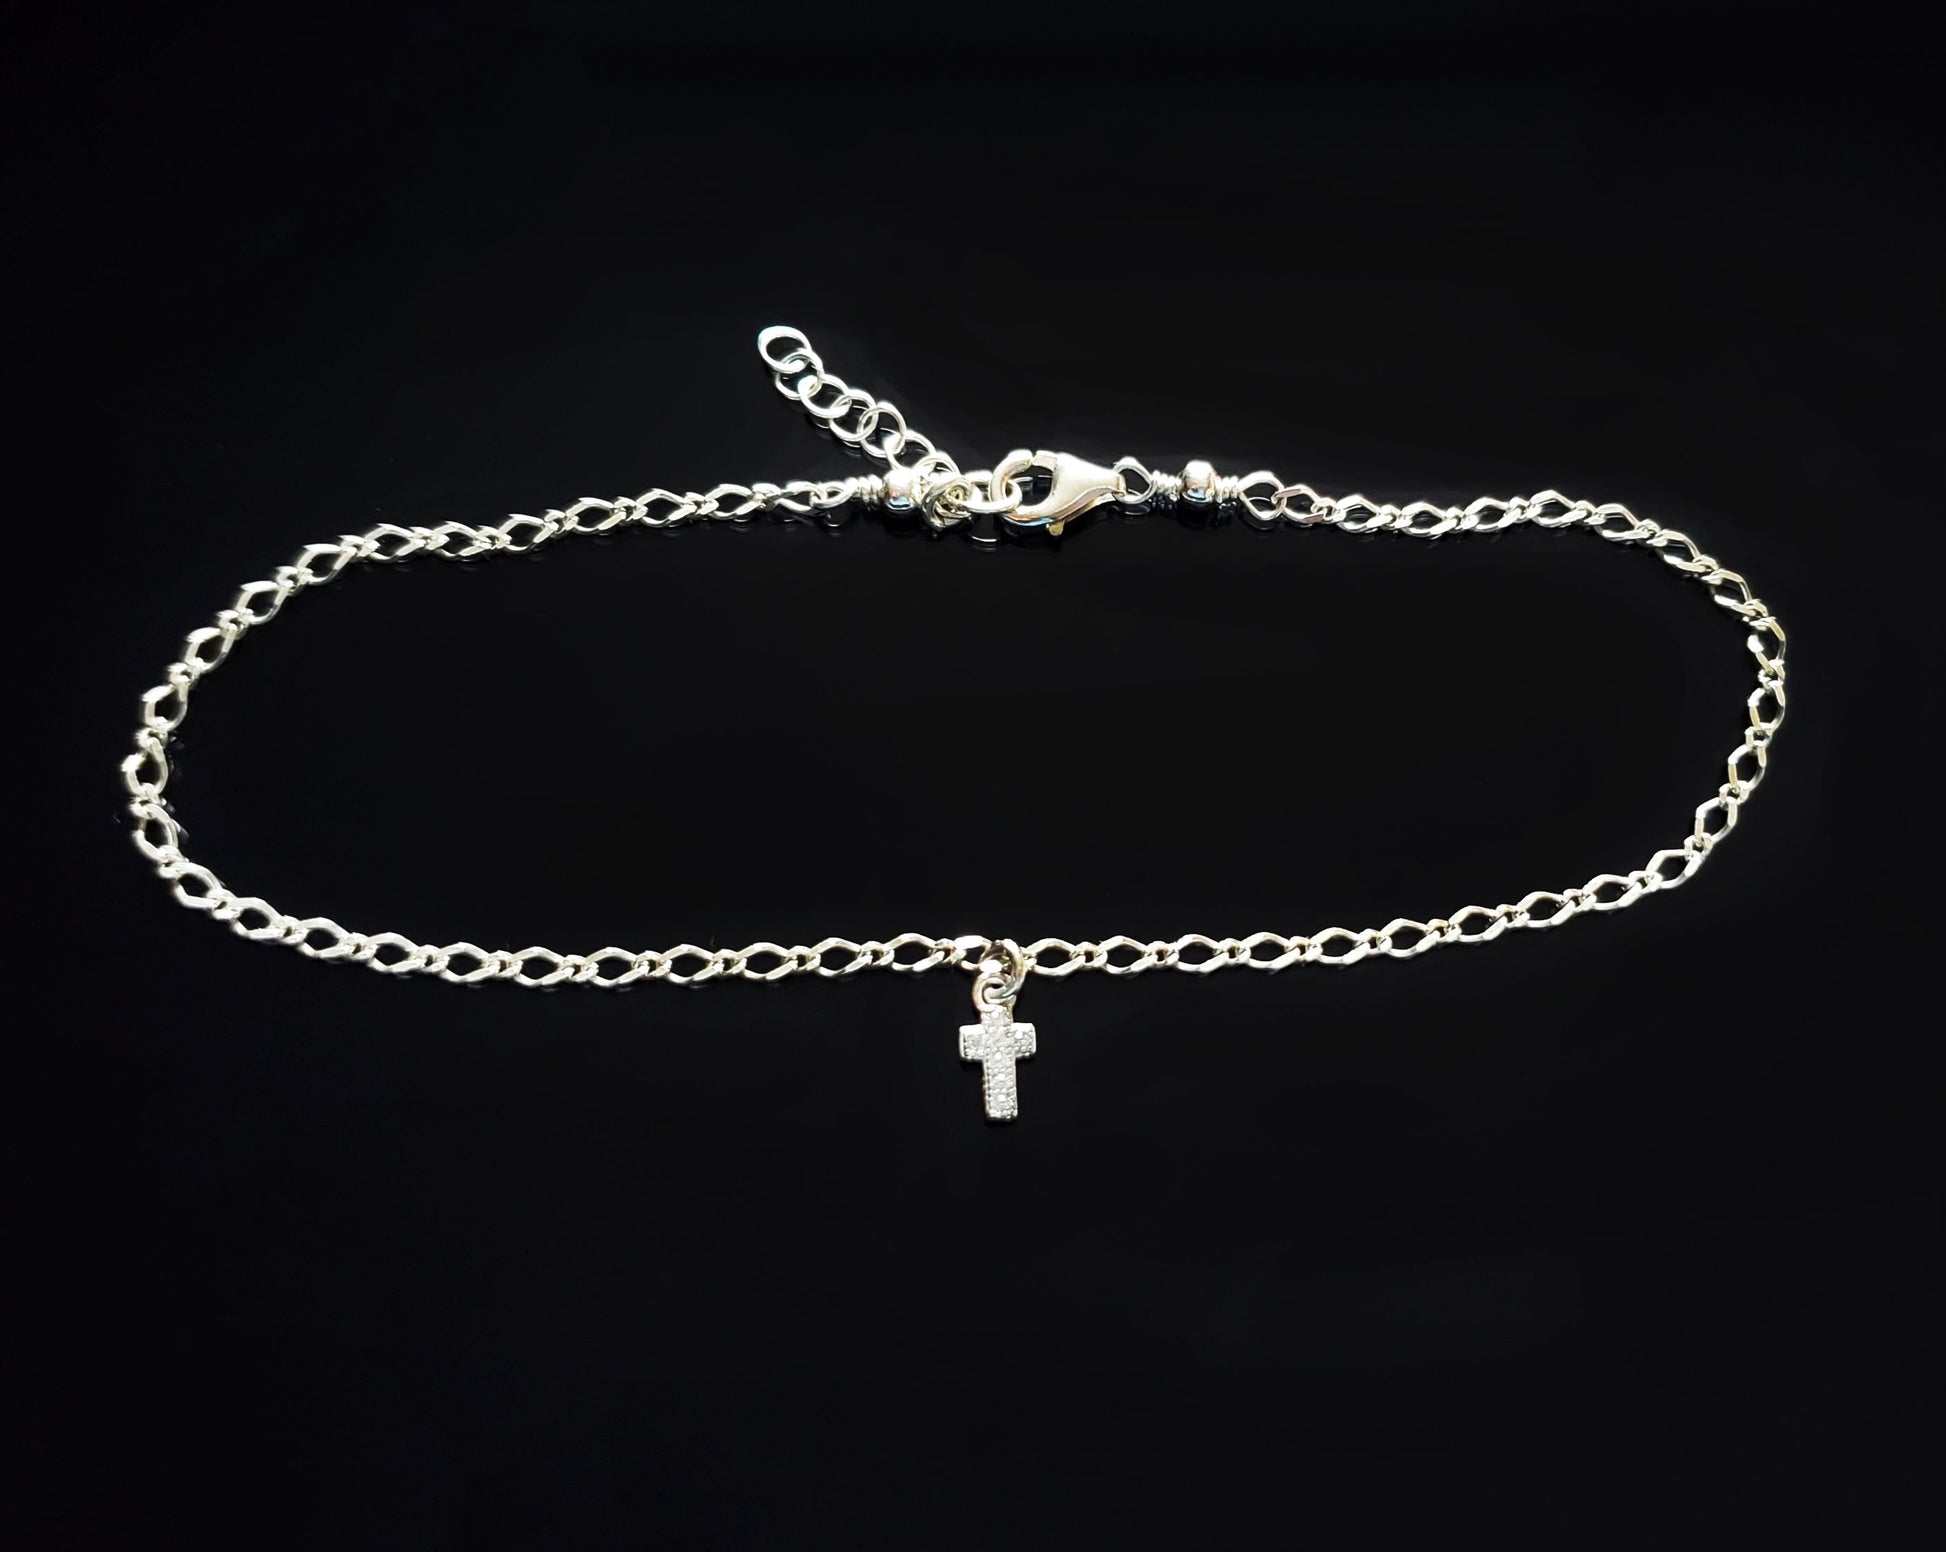 Cubic Zirconia Cross Ankle Bracelet / Anklet Handmade with Solid Sterling Silver, Minimalist Style Christian Anklet 